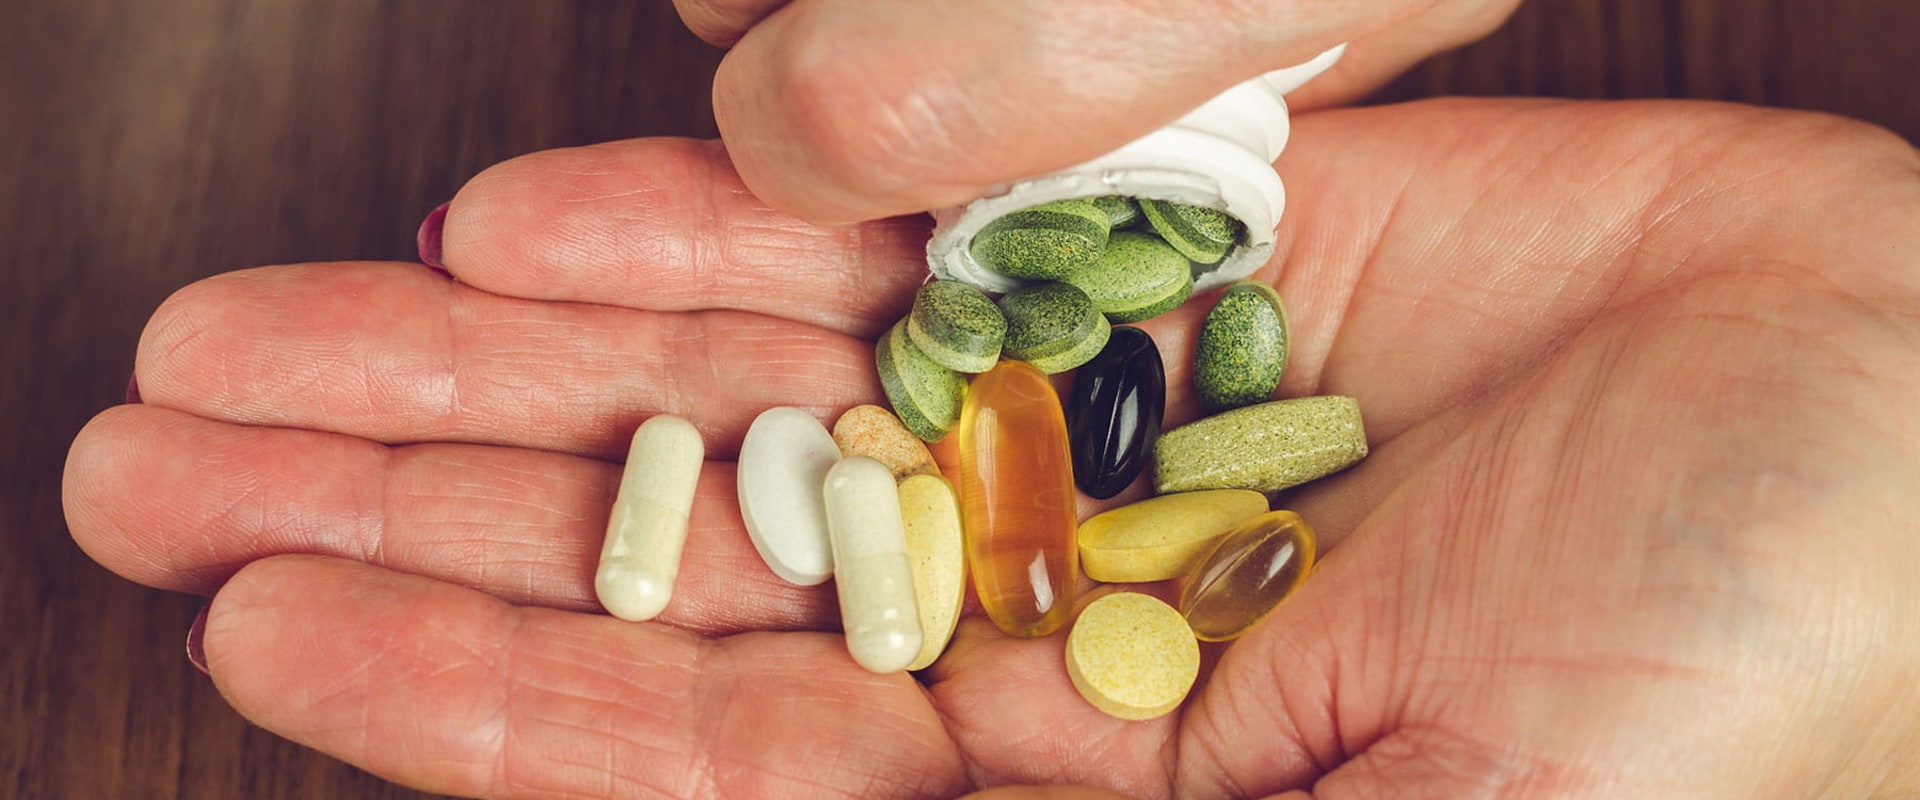 Can I Take More Than One Type of Vitamin Supplement in a Week? - An Expert's Perspective